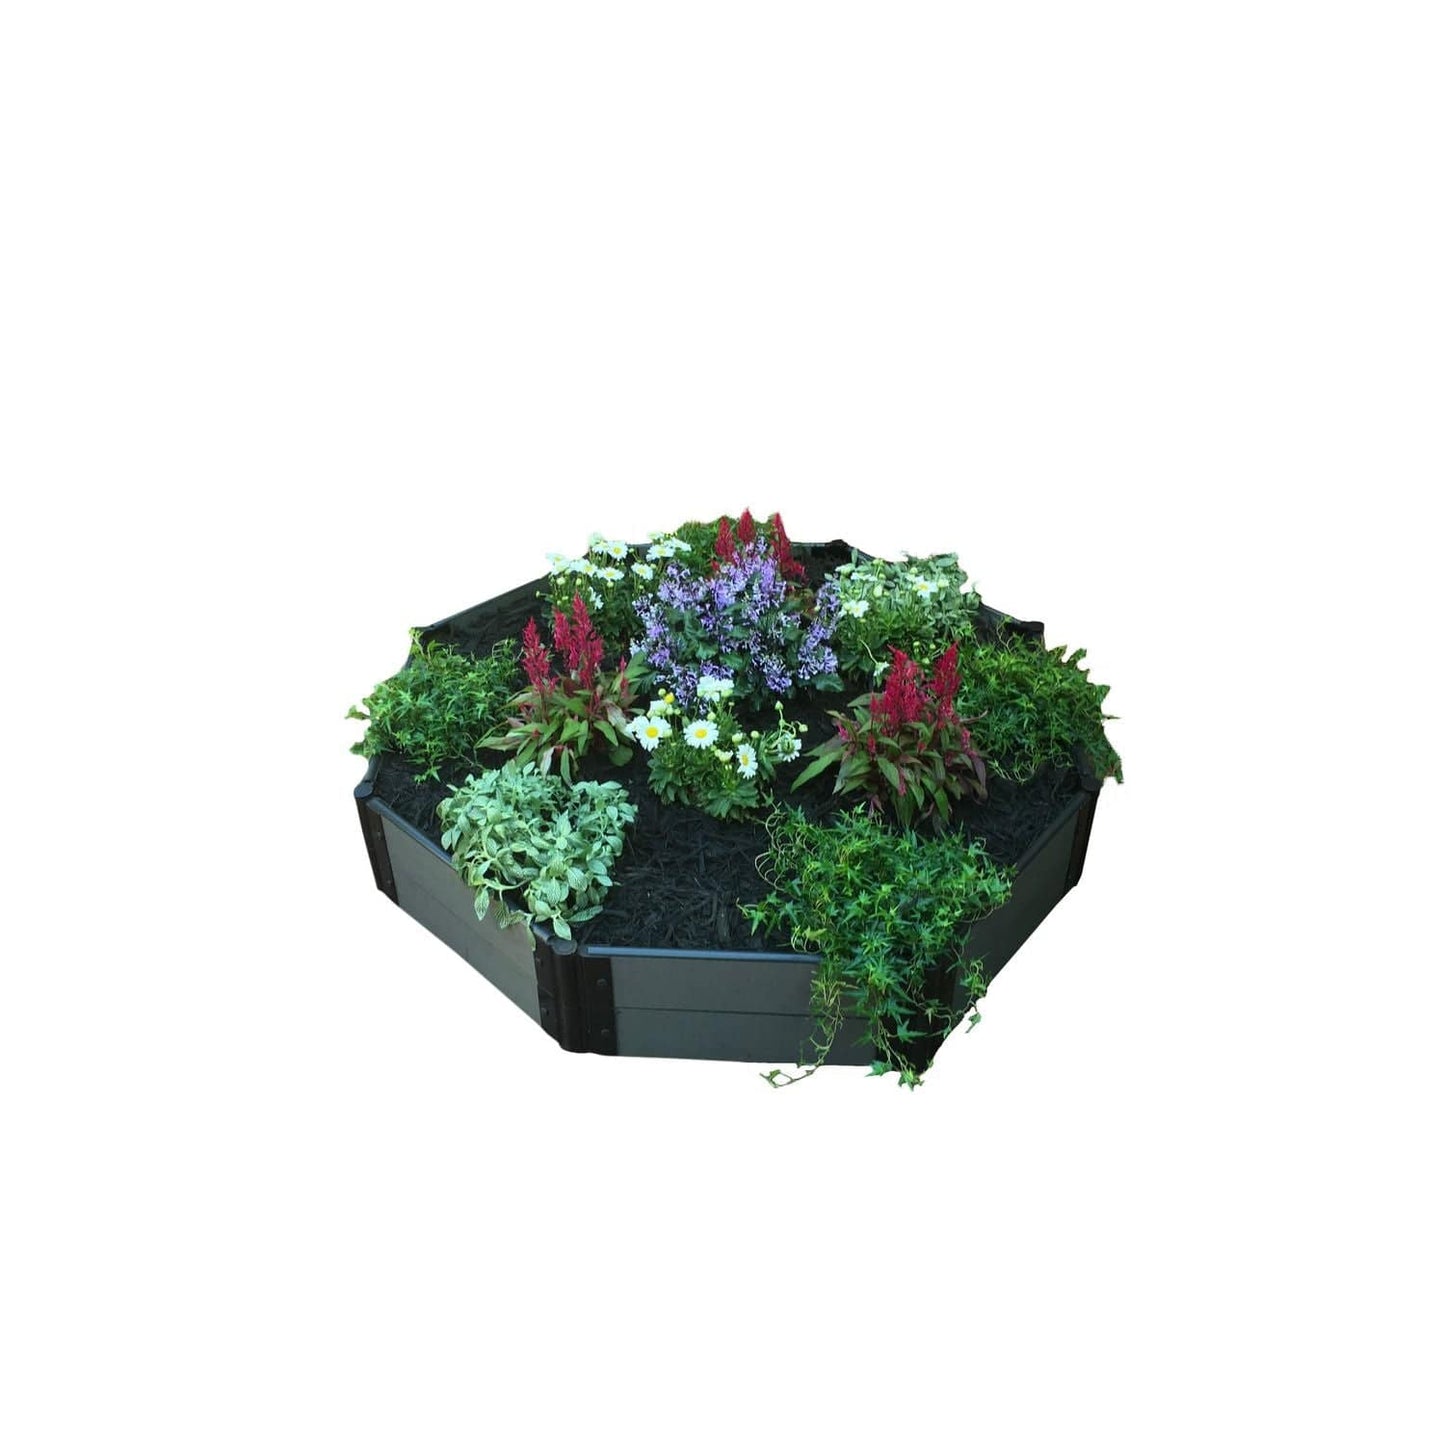 Frame It All Gardening Accessories Frame It All | Tool-Free Fort Jefferson Raised Garden Bed (Hexagon) 4' X 4' X 11" - Classic Sienna